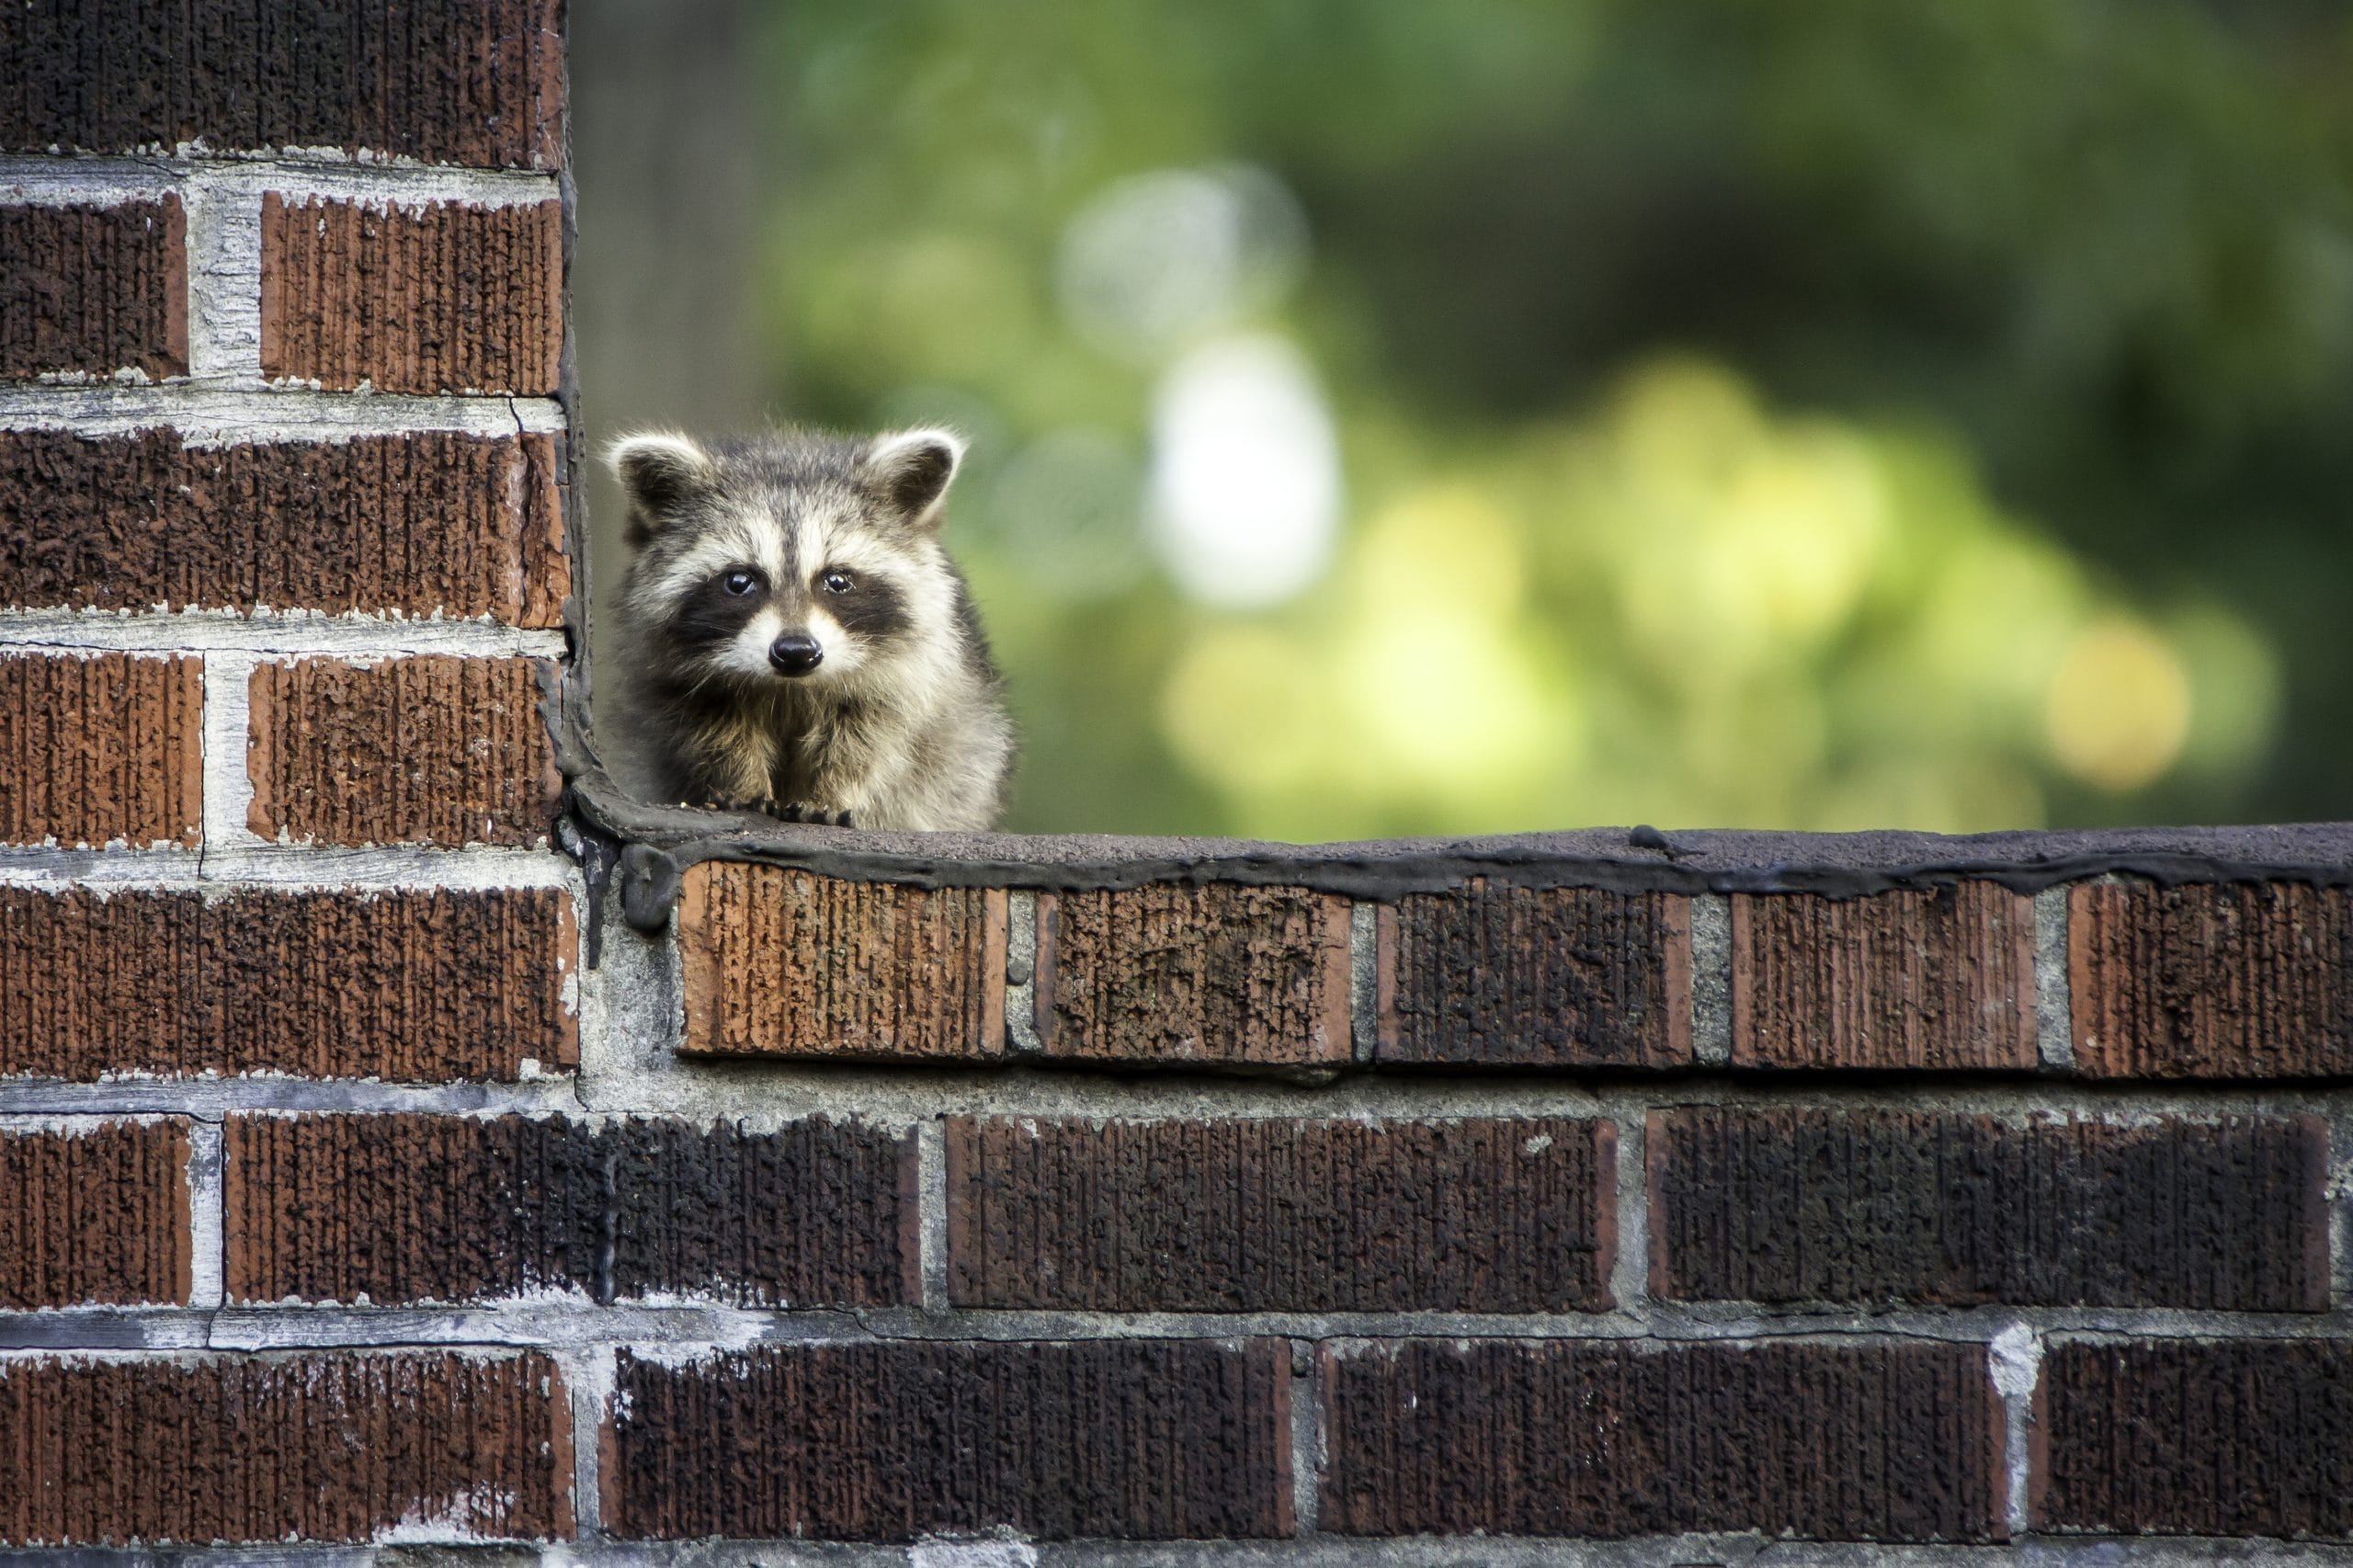 A residential home has a raccoon causing damage and is in need of wildlife control